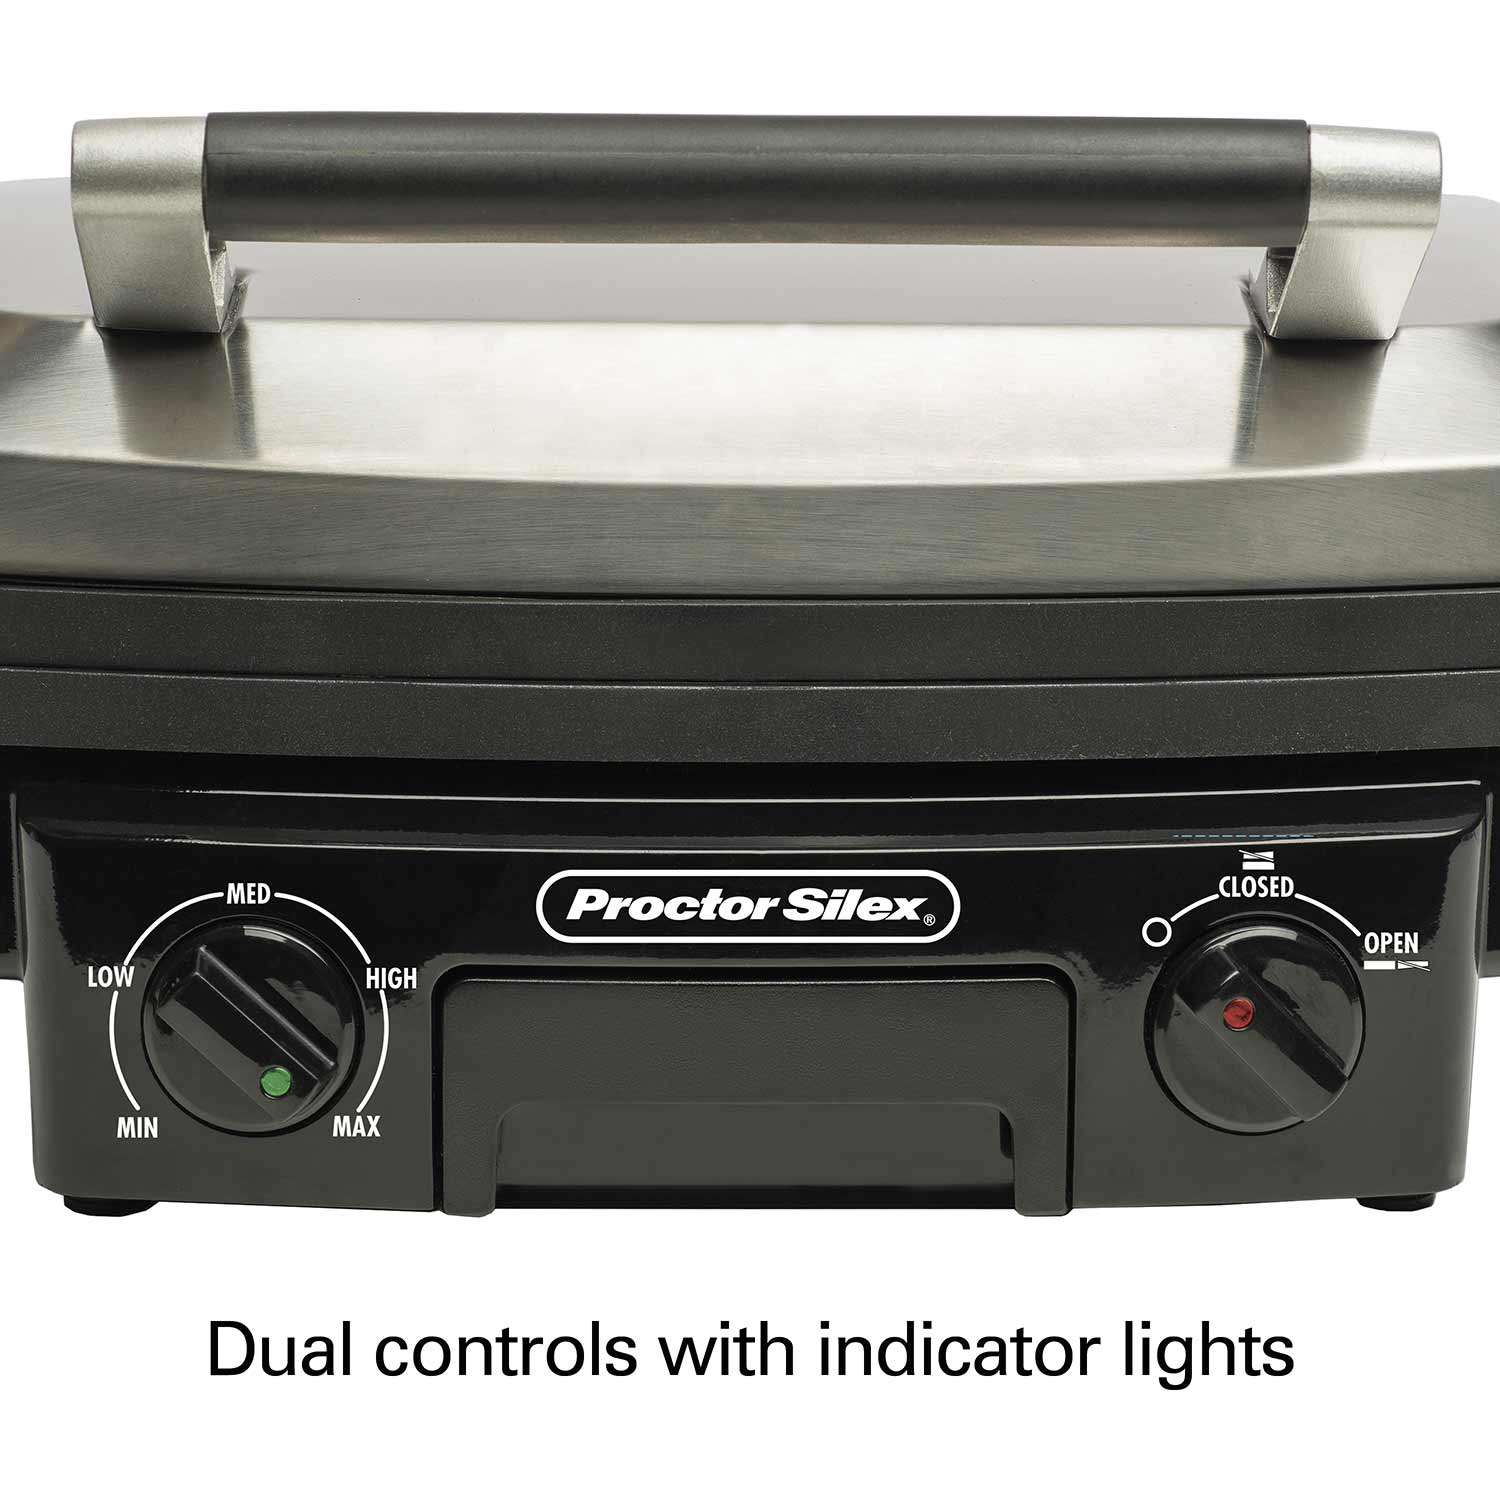 5-in-1 Grill/Griddle - Model 25340